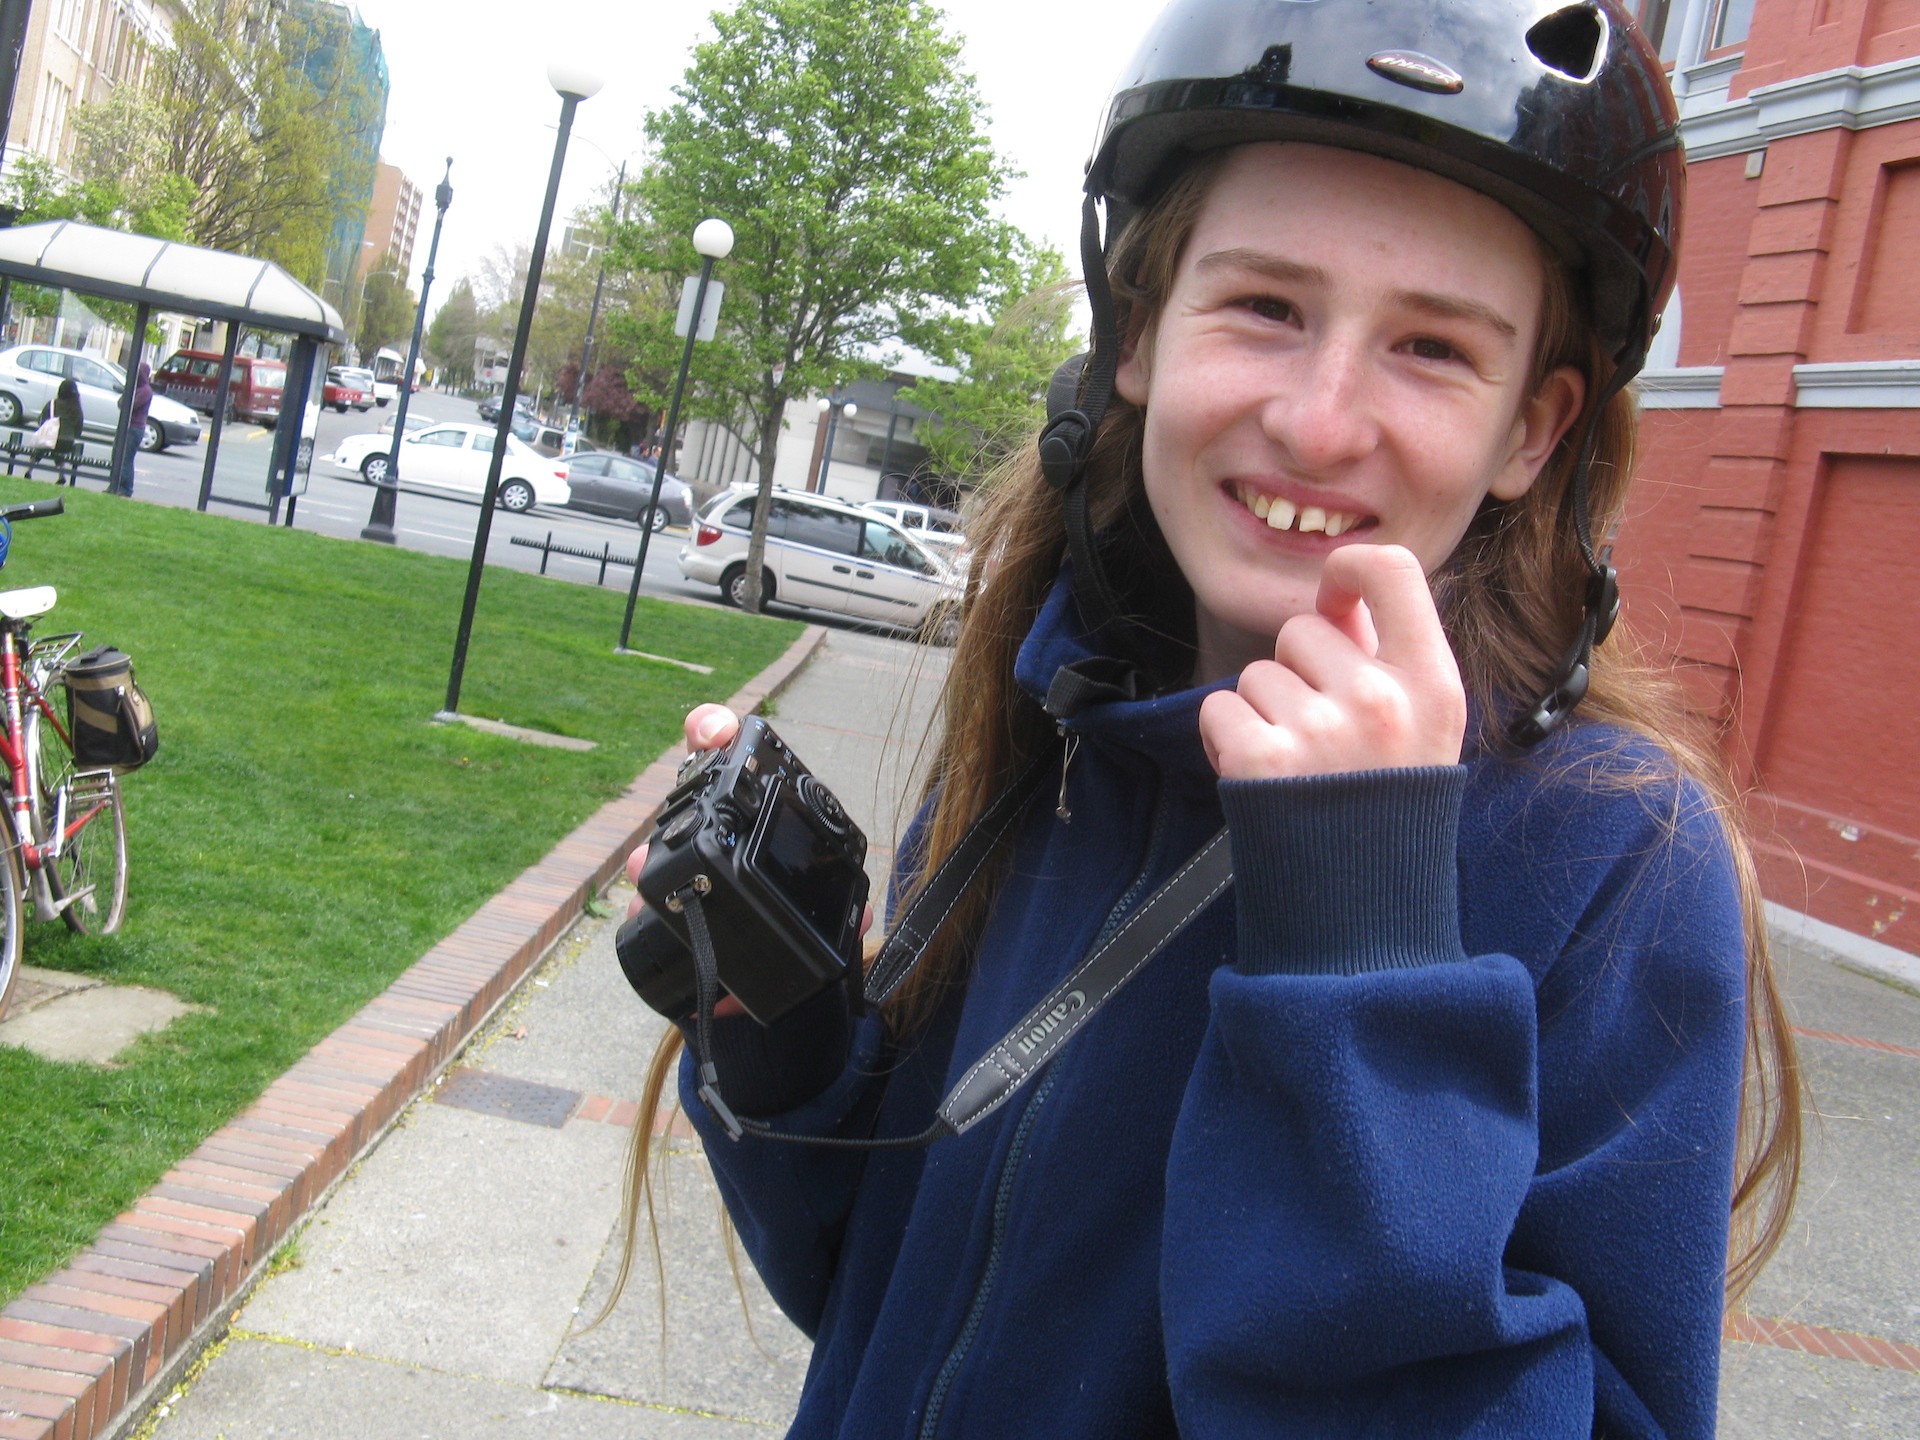 a student cyclist takes pictures on a school field trip